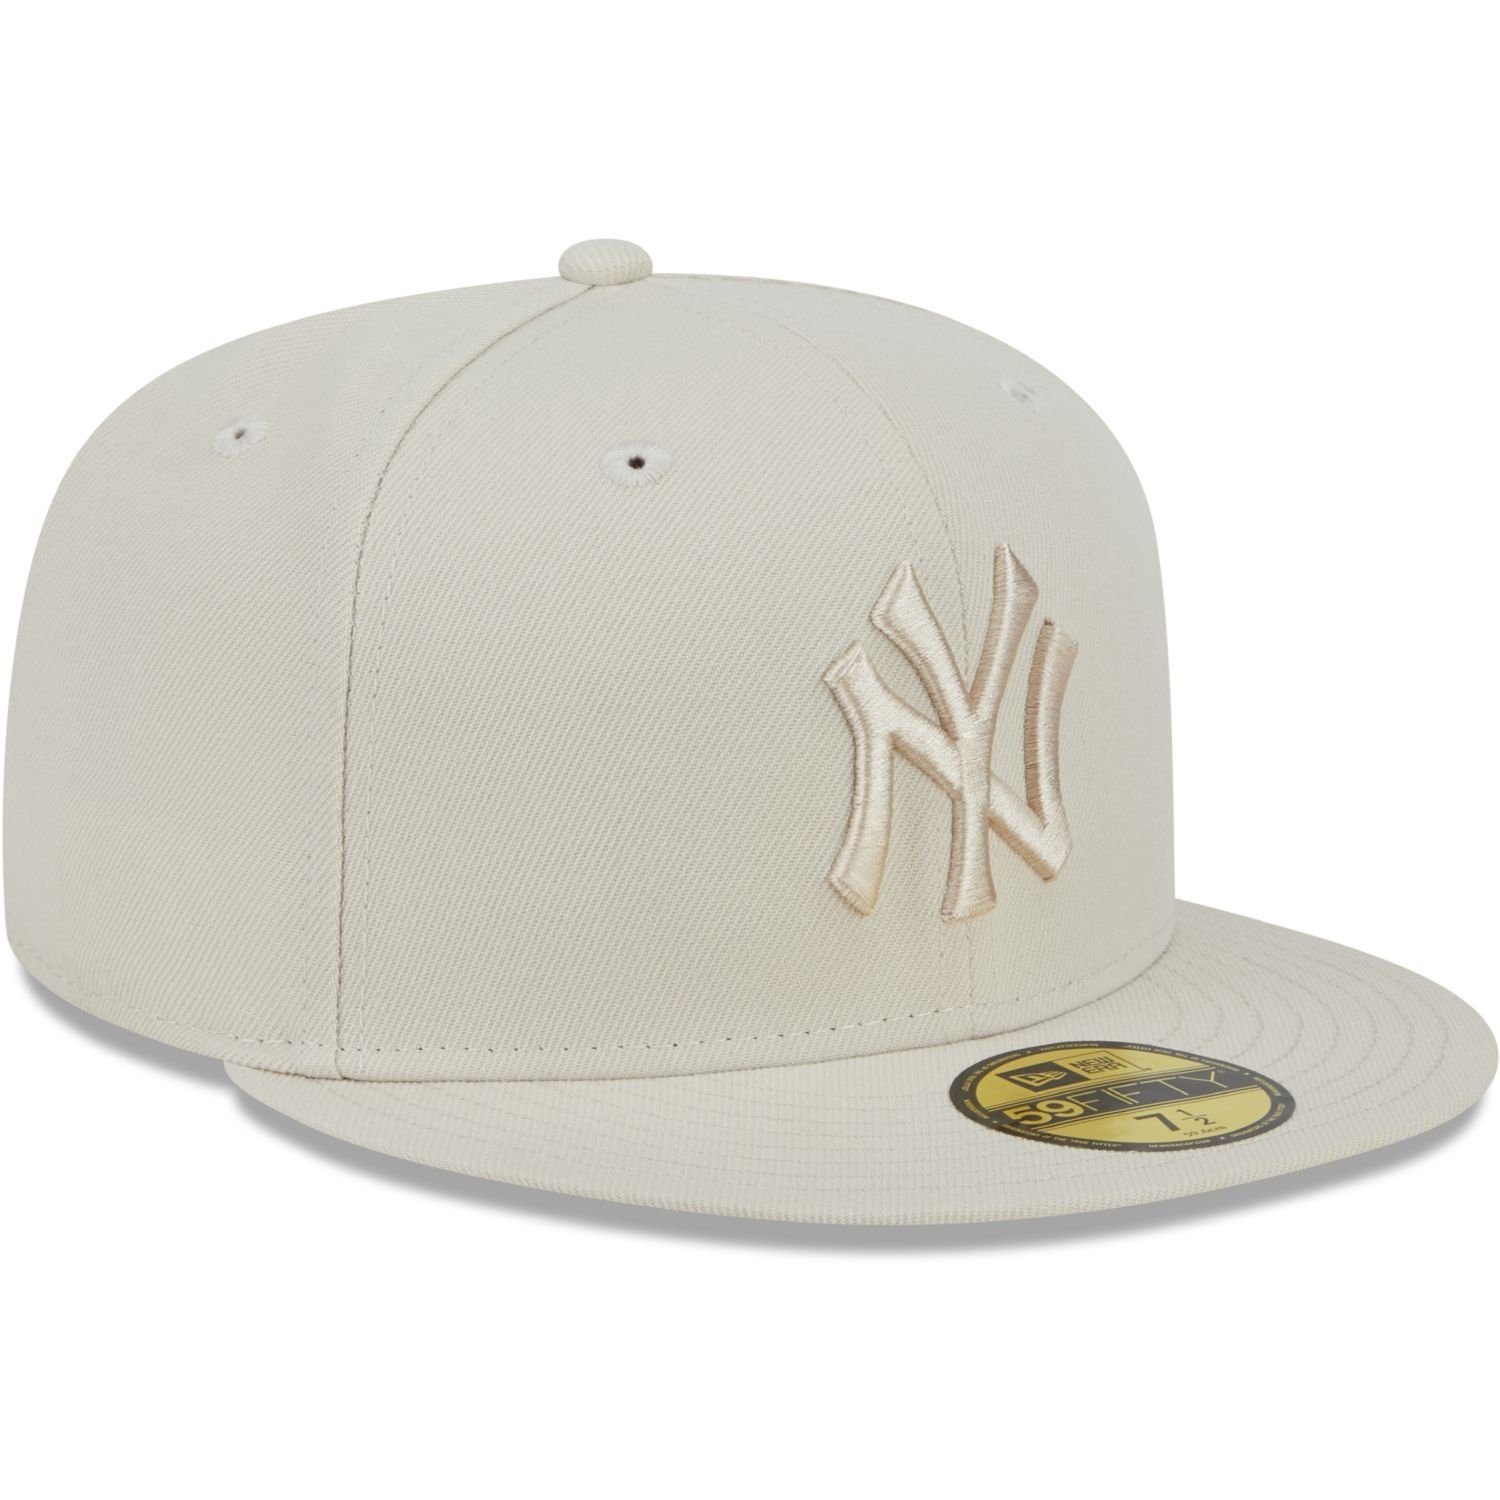 Fitted York New Cap 59Fifty Era Yankees New MLB